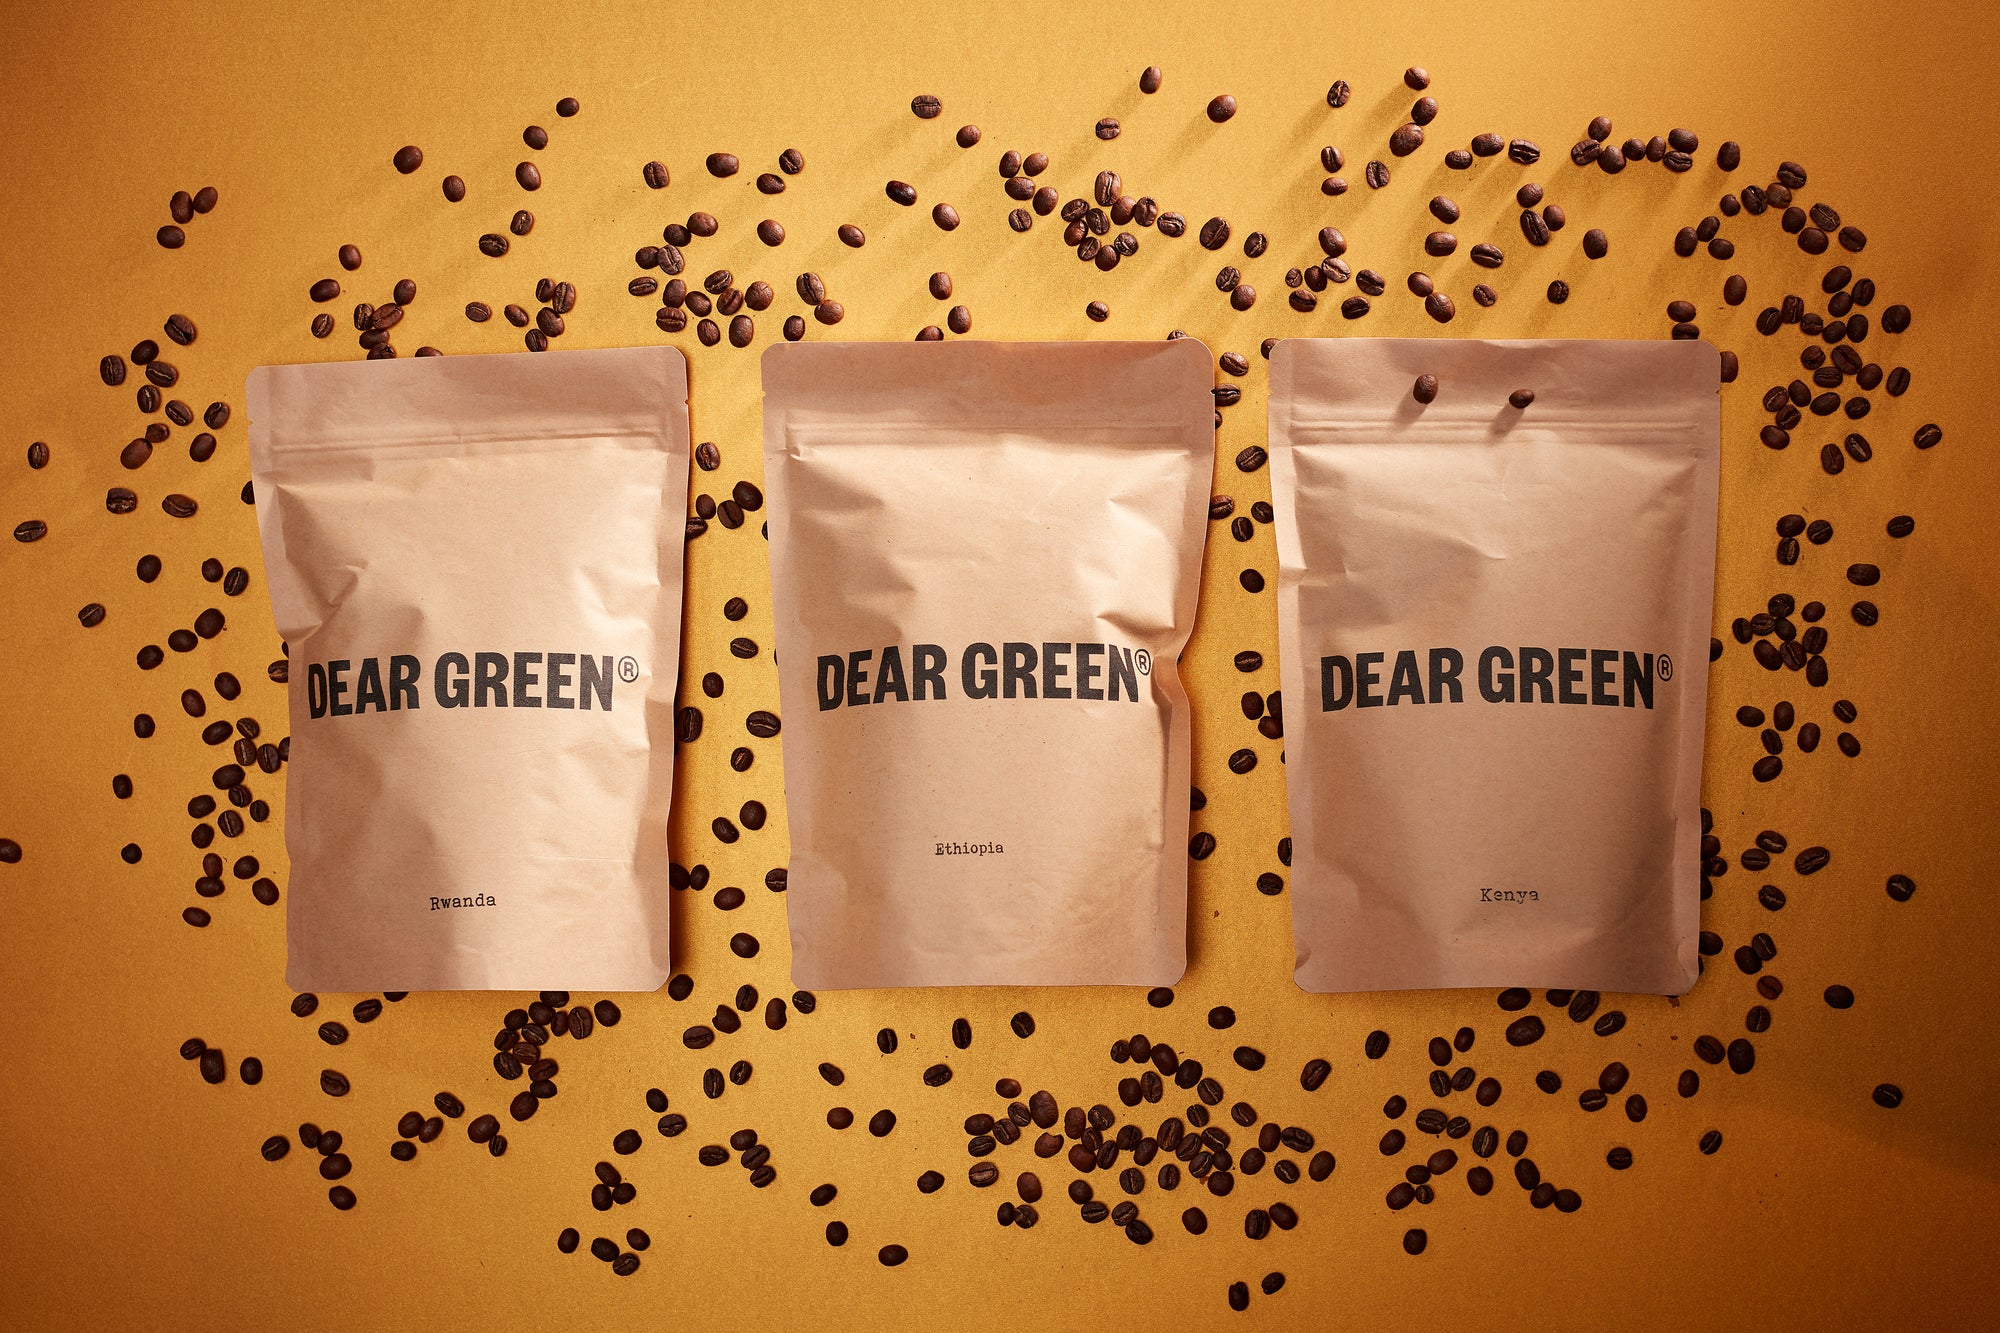 Three brown bags of coffee beans with the Dear Green logo, each labeled with their origin - Rwanda, Ethiopia and Kenya. Scattered around the bags are loose coffee beans and the composition is on a warm yellow background.